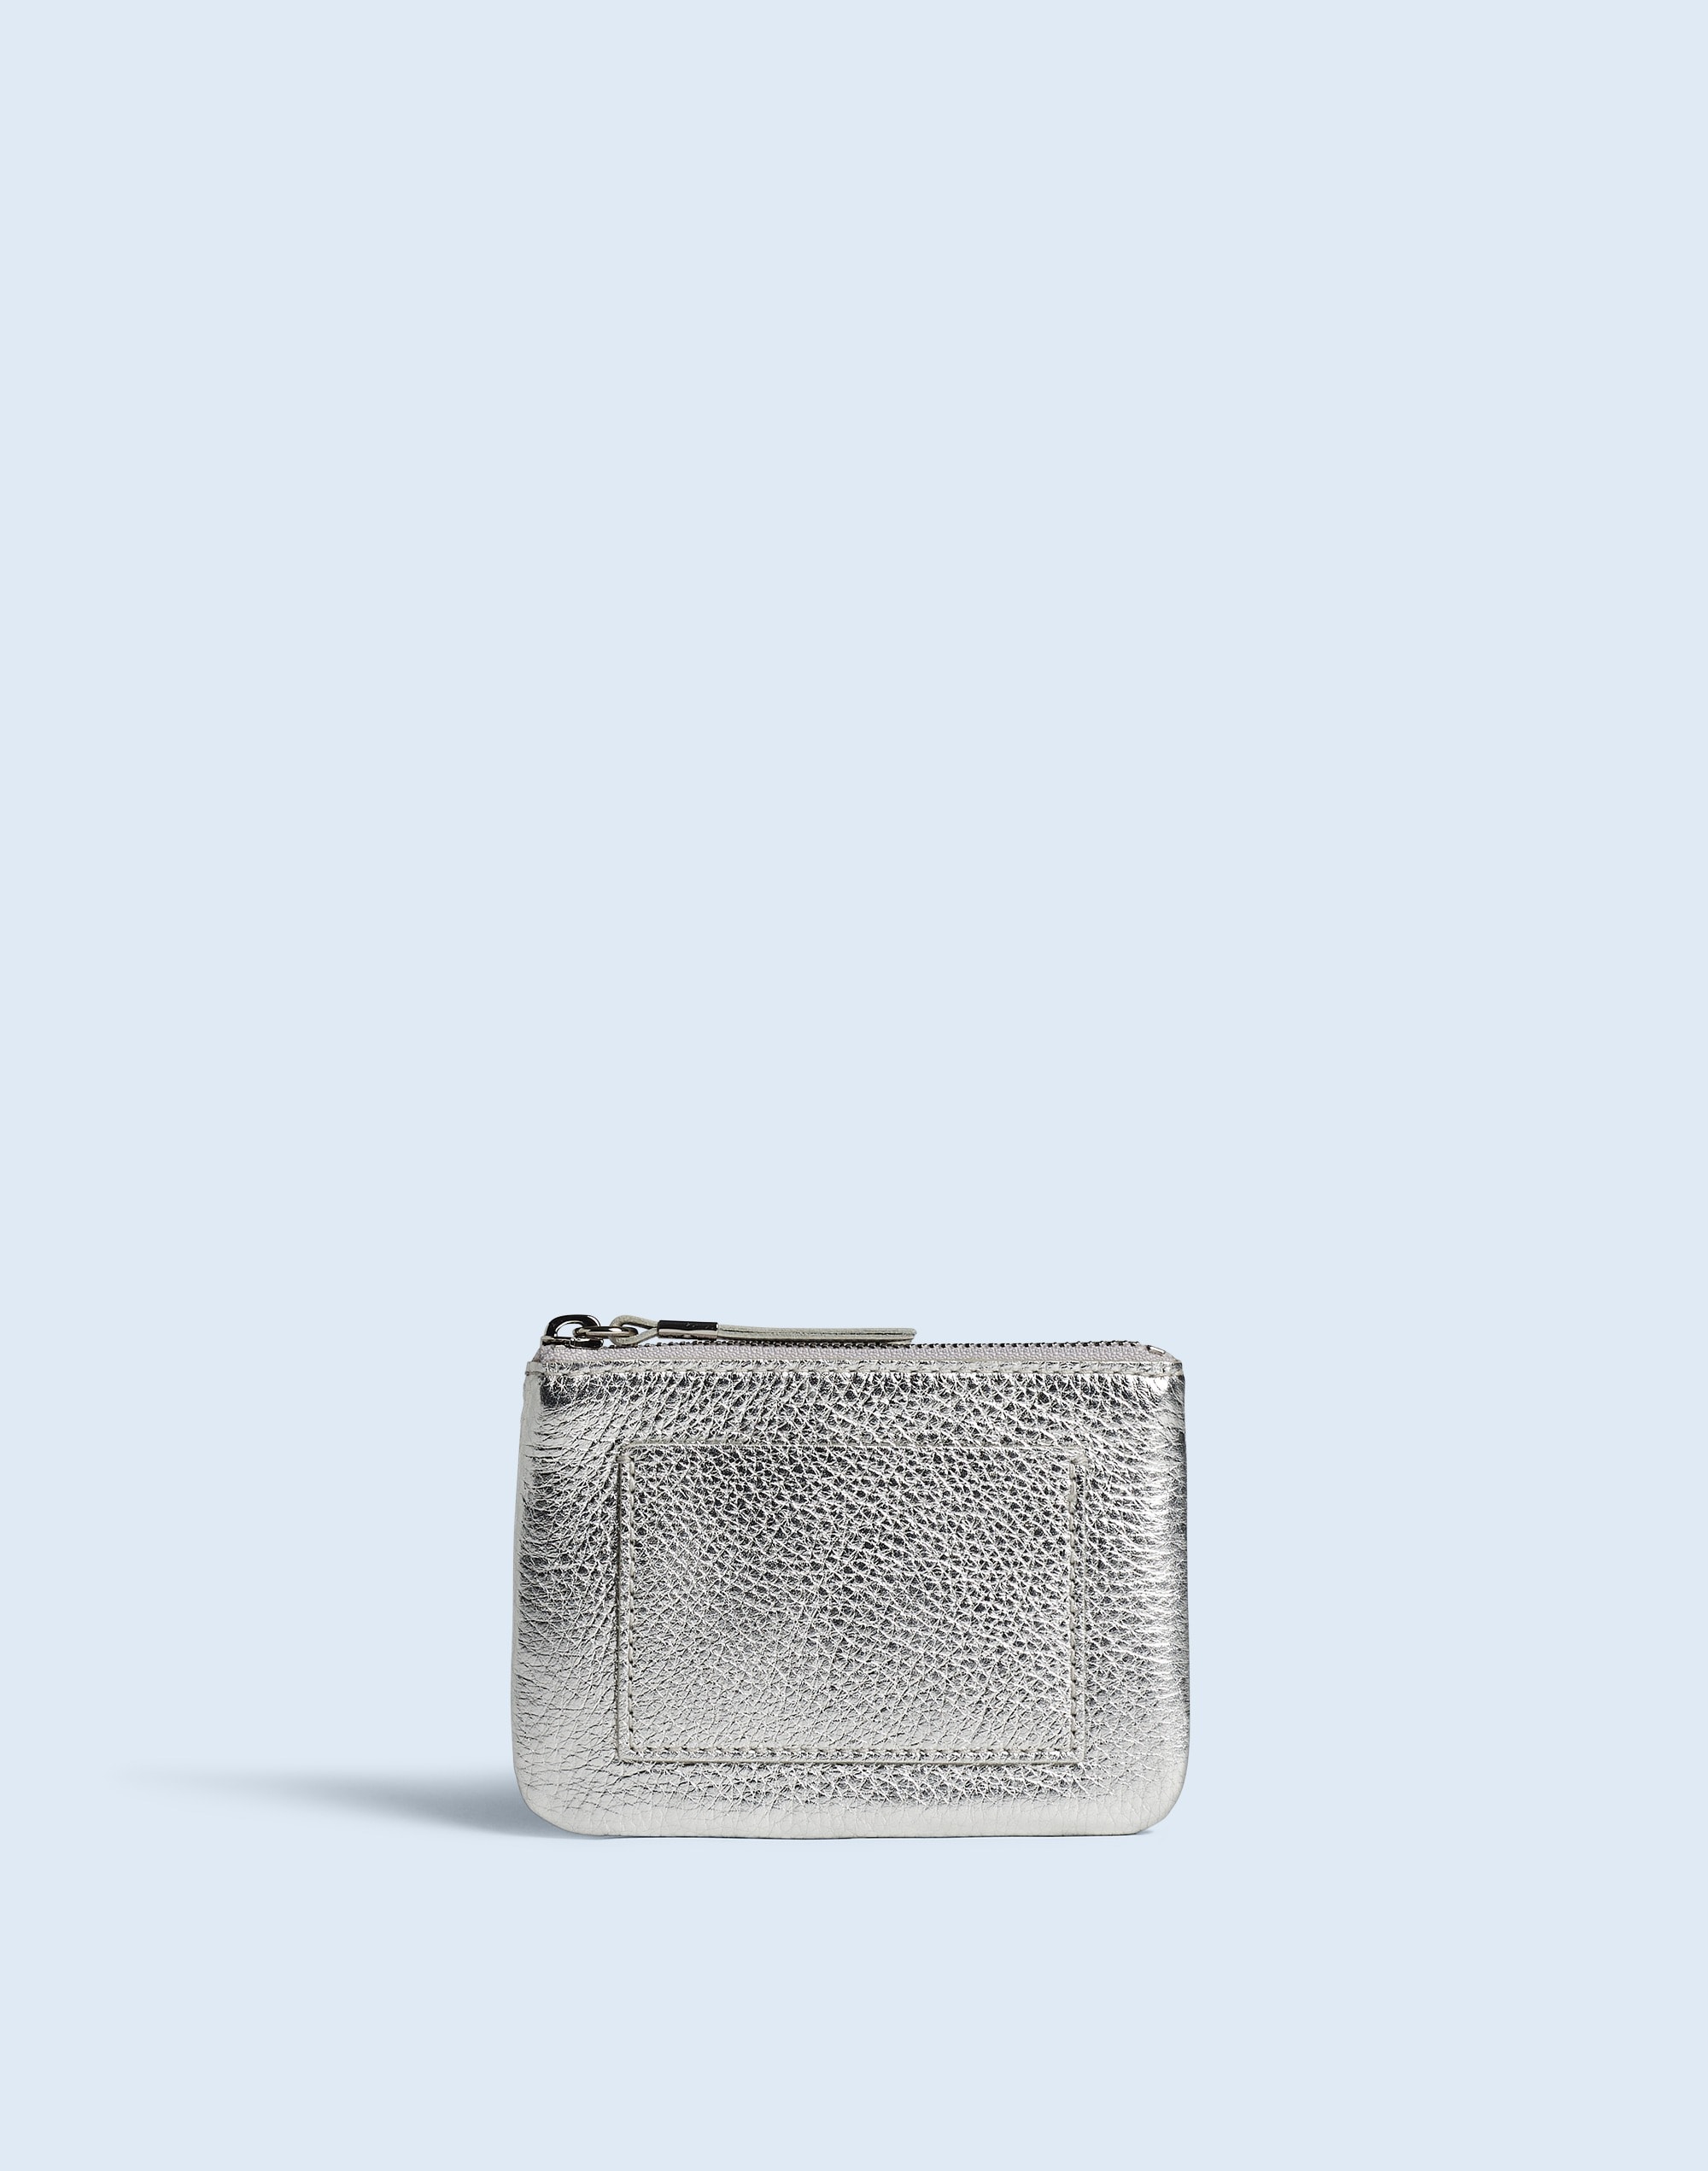 Mw The Small Travel Zip Pouch In Neutral